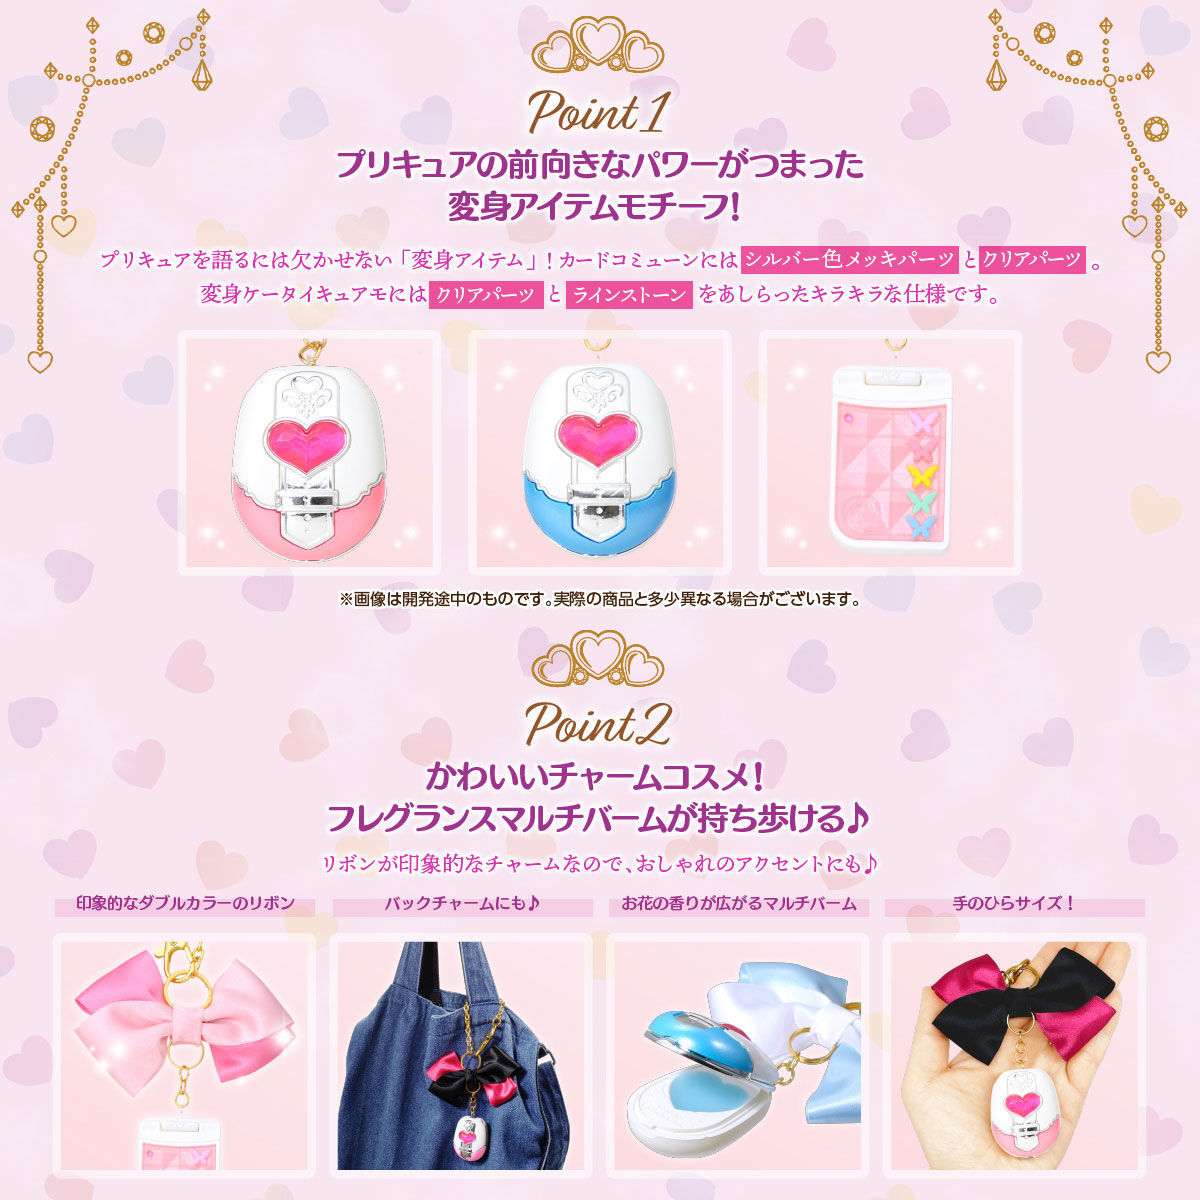 Pretty Holic Luxe プリティアイテムチャームコスメ | プリキュア 